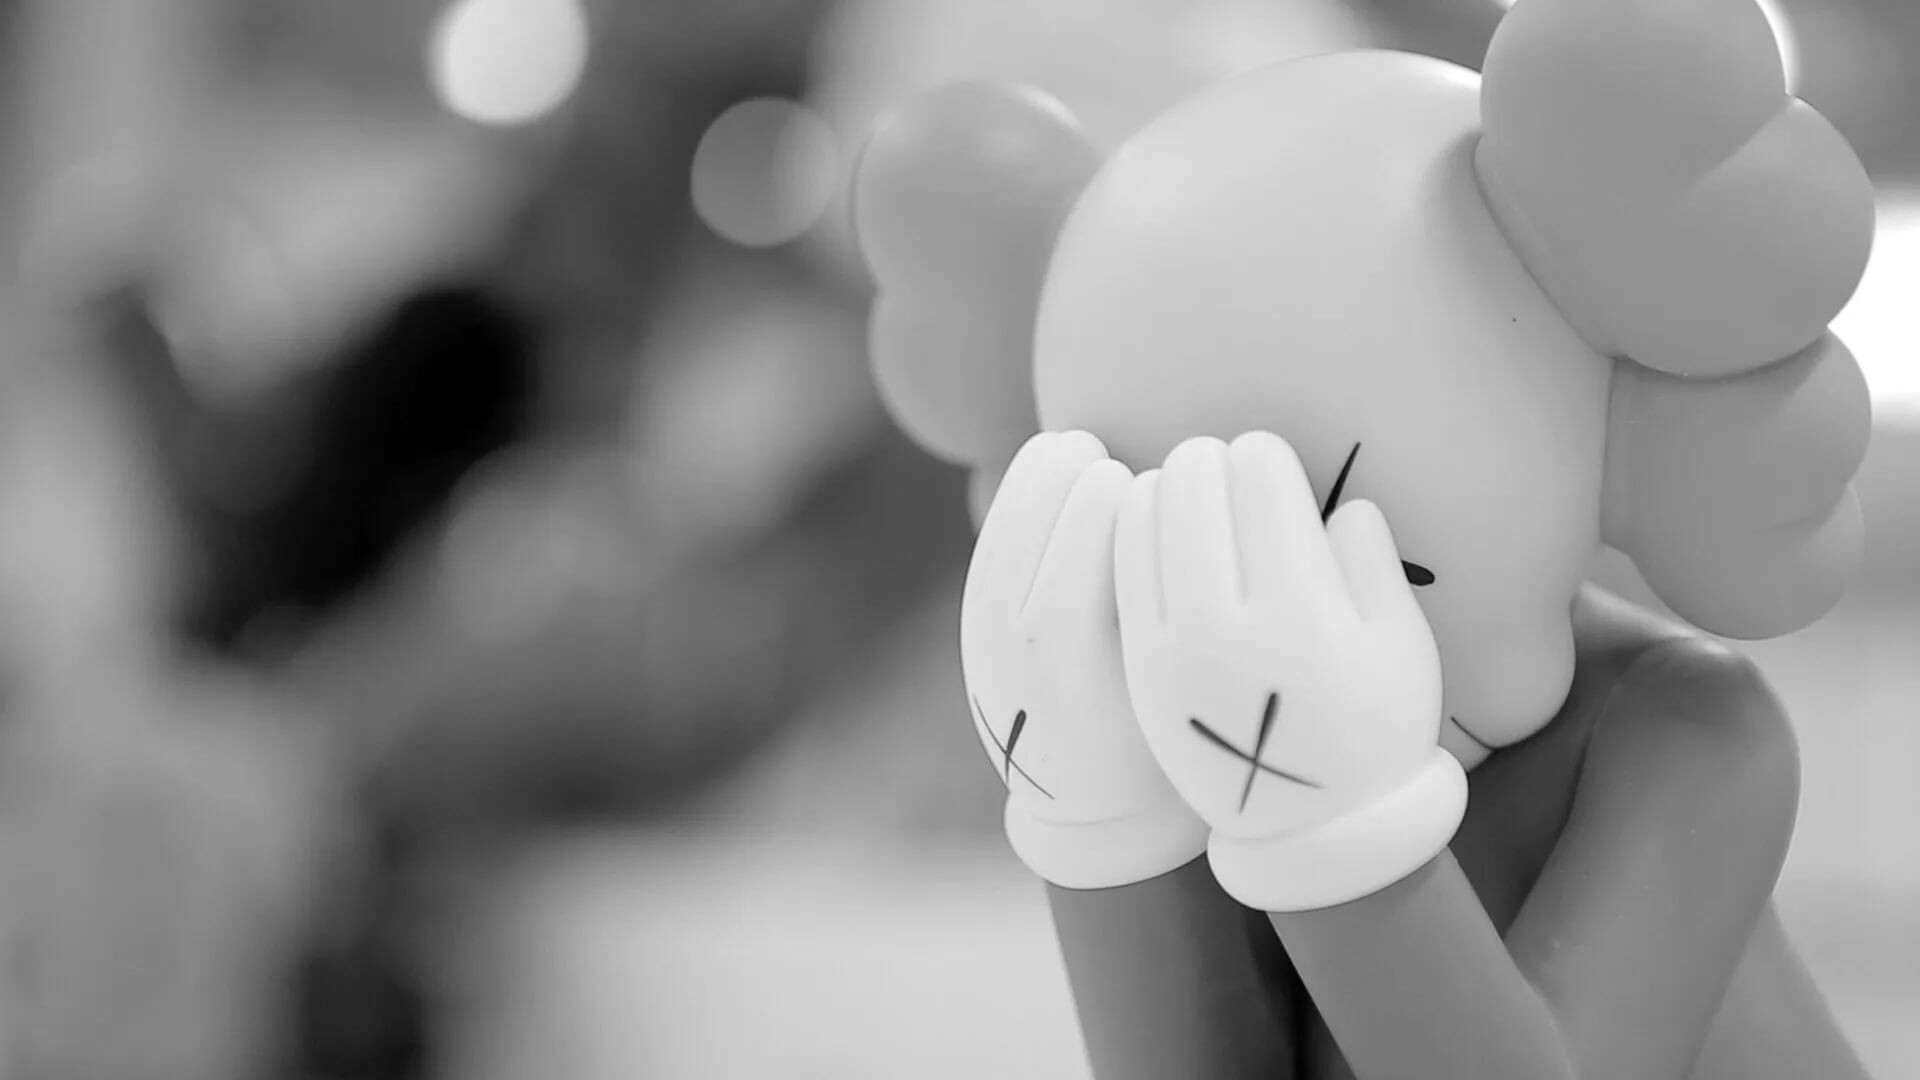 KAWS: Known for his murals and large-scale public art installations around the world. 1920x1080 Full HD Background.